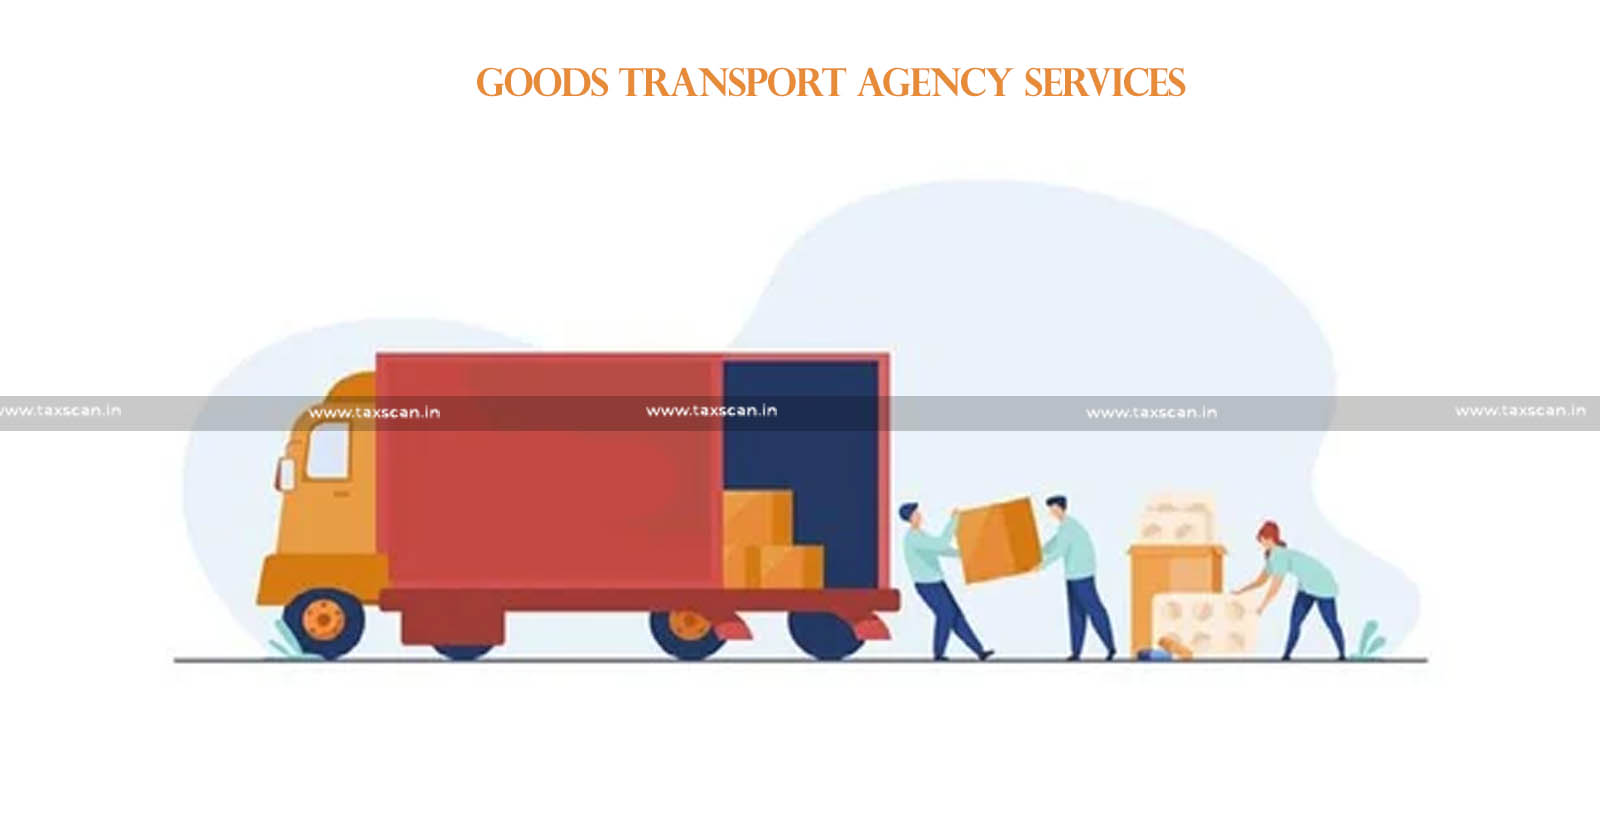 Service Tax Liability -Goods Transport Agency service - Verifying Certificates Obtained from Transporters - CESTAT Directs Re-adjudication - taxscan